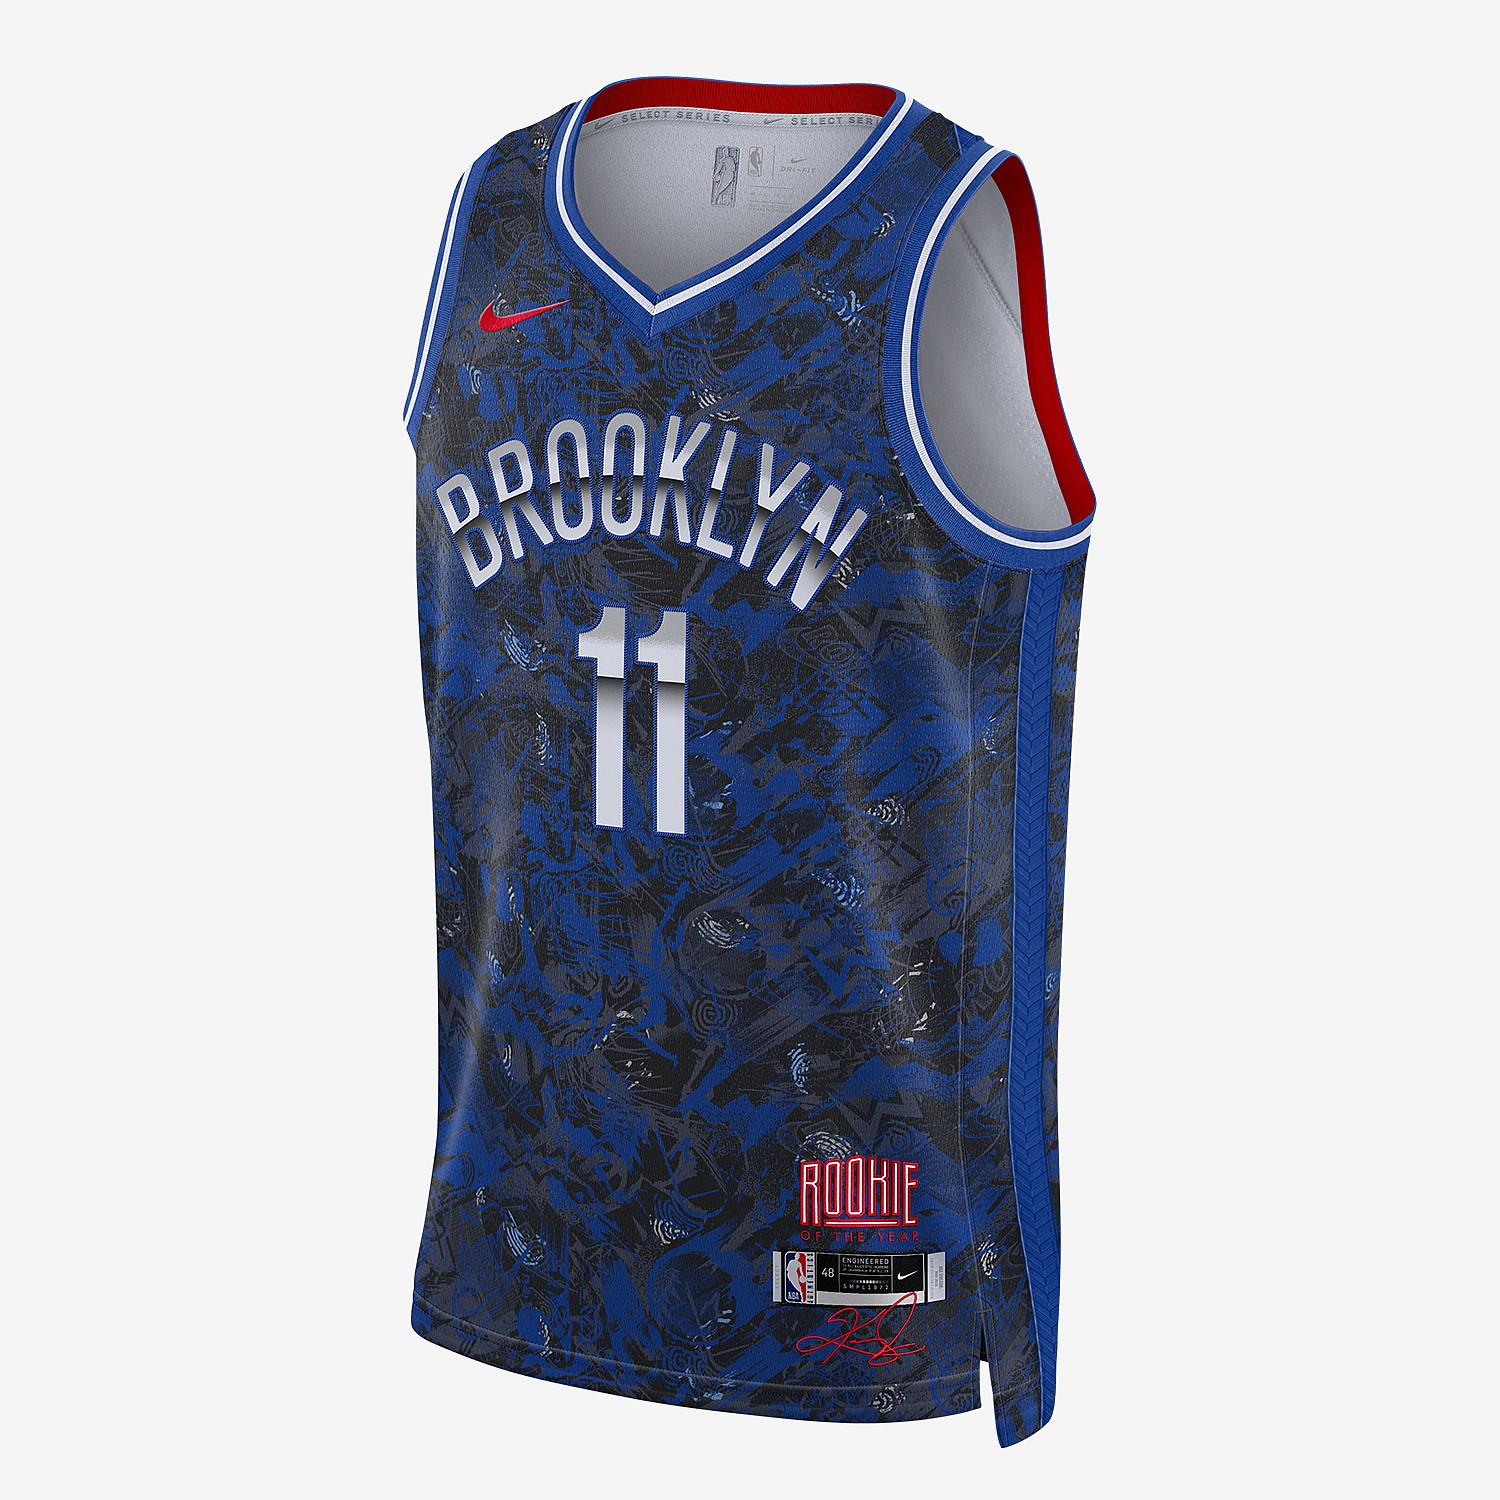 New Arrivals for Men's, Women's and Kid's  Stirling Sports - Kyrie Irving  Brooklyn Nets Swingman Jersey